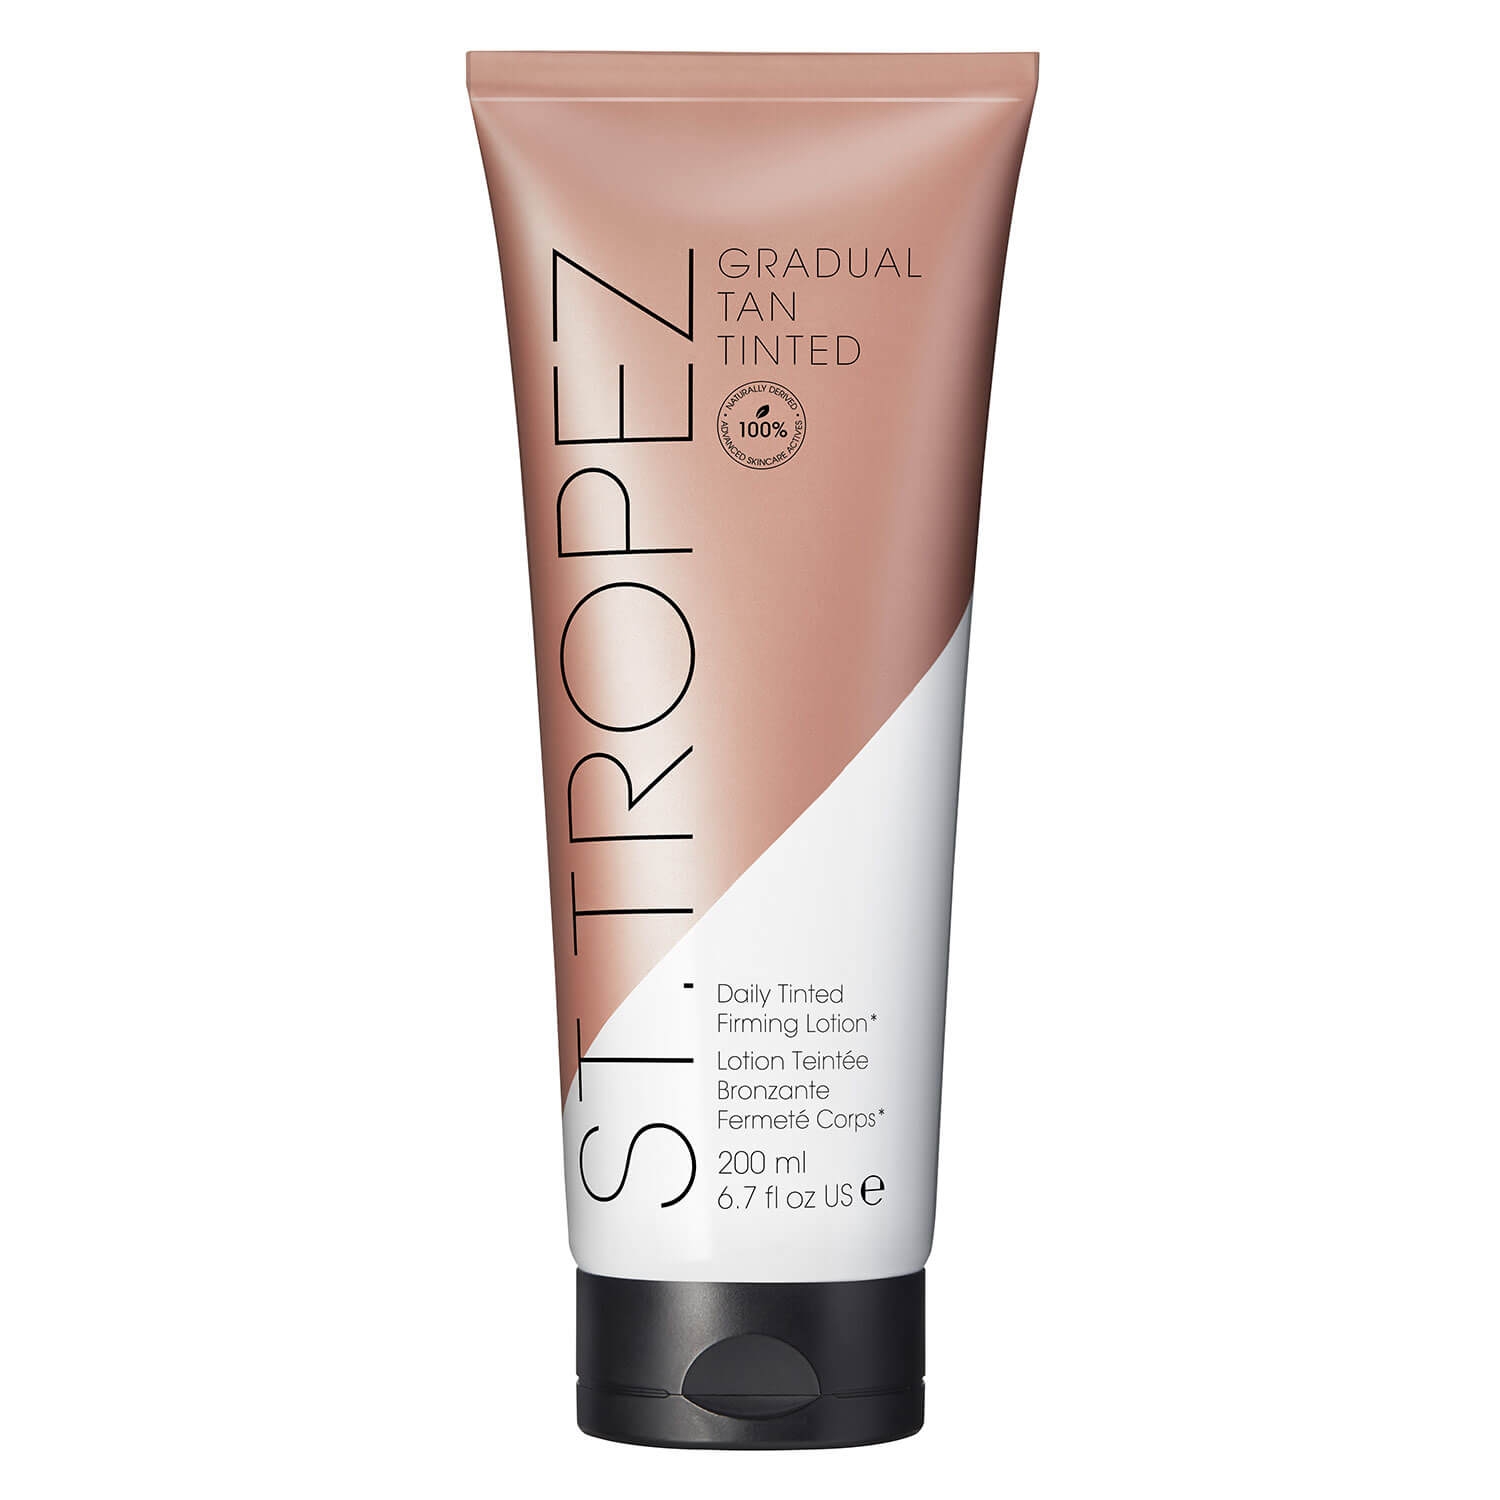 Product image from St.Tropez - Gradual Tan Tinted Daily Tinted Firming Lotion